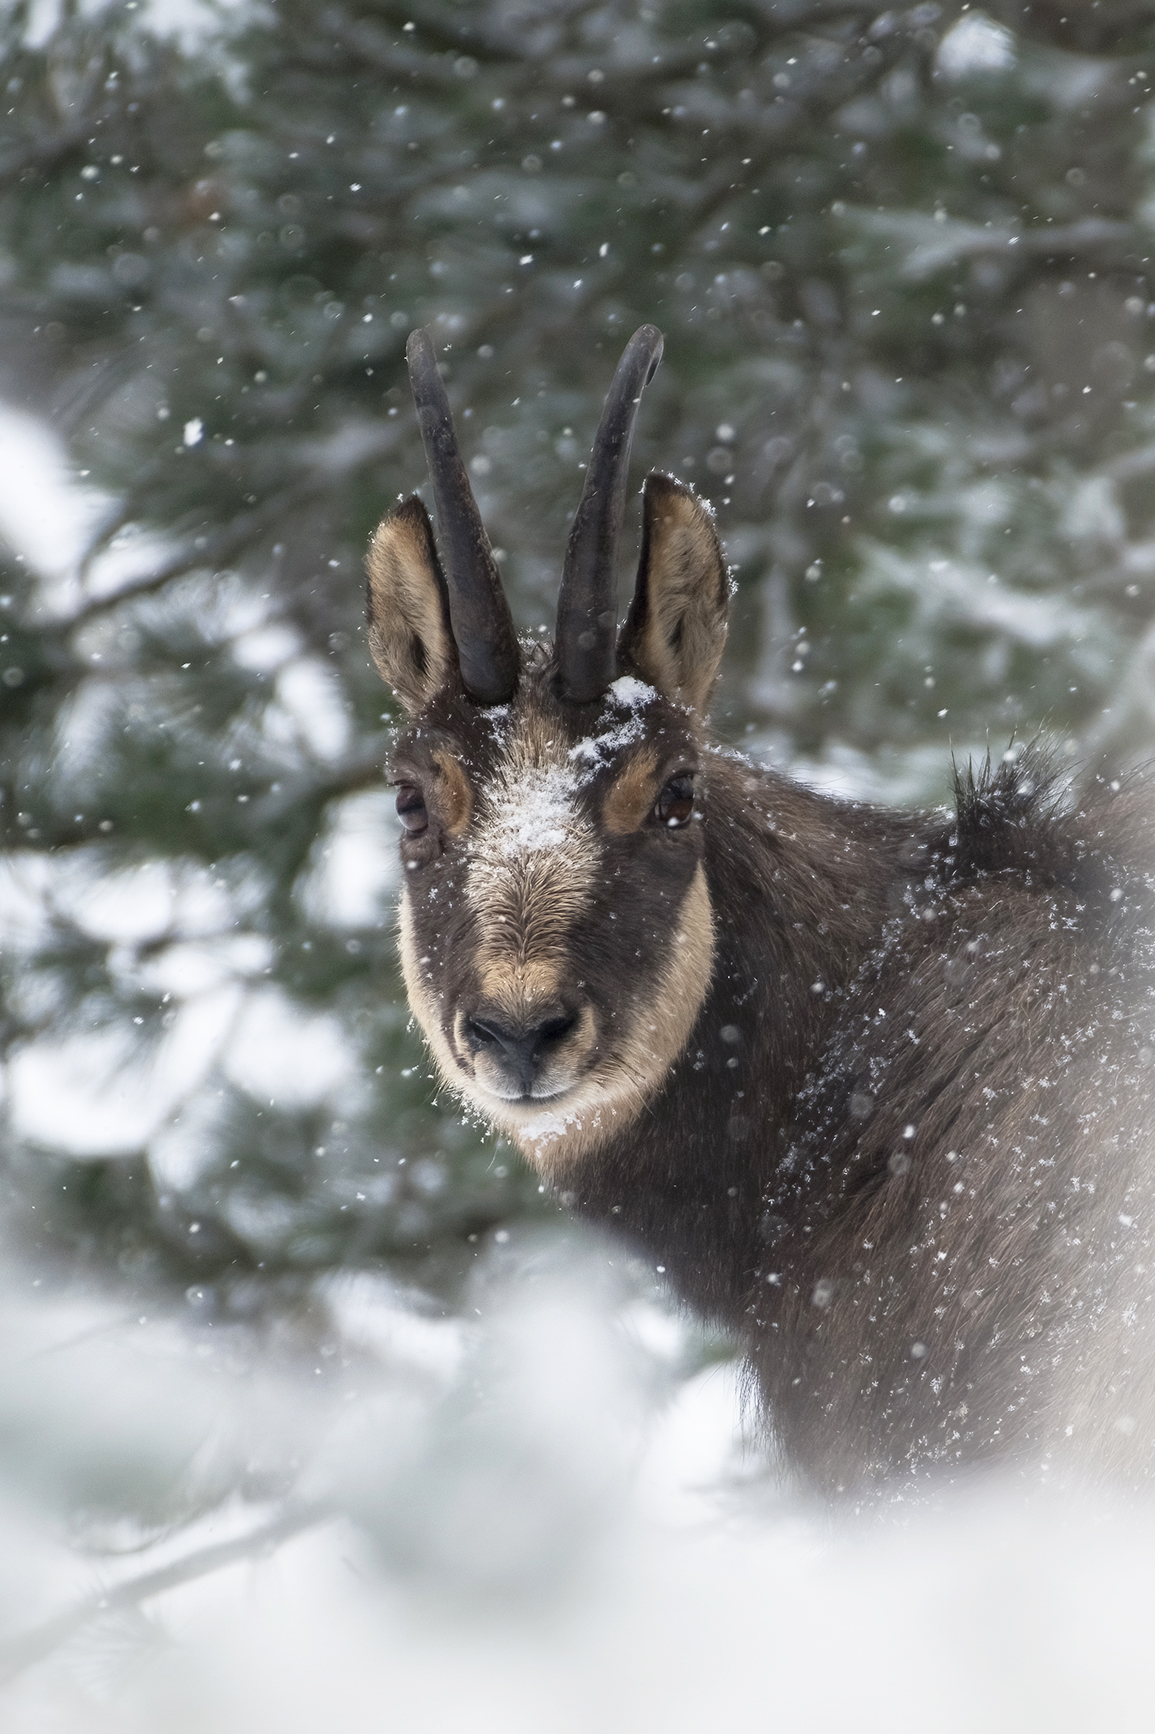 The winter of the chamois...